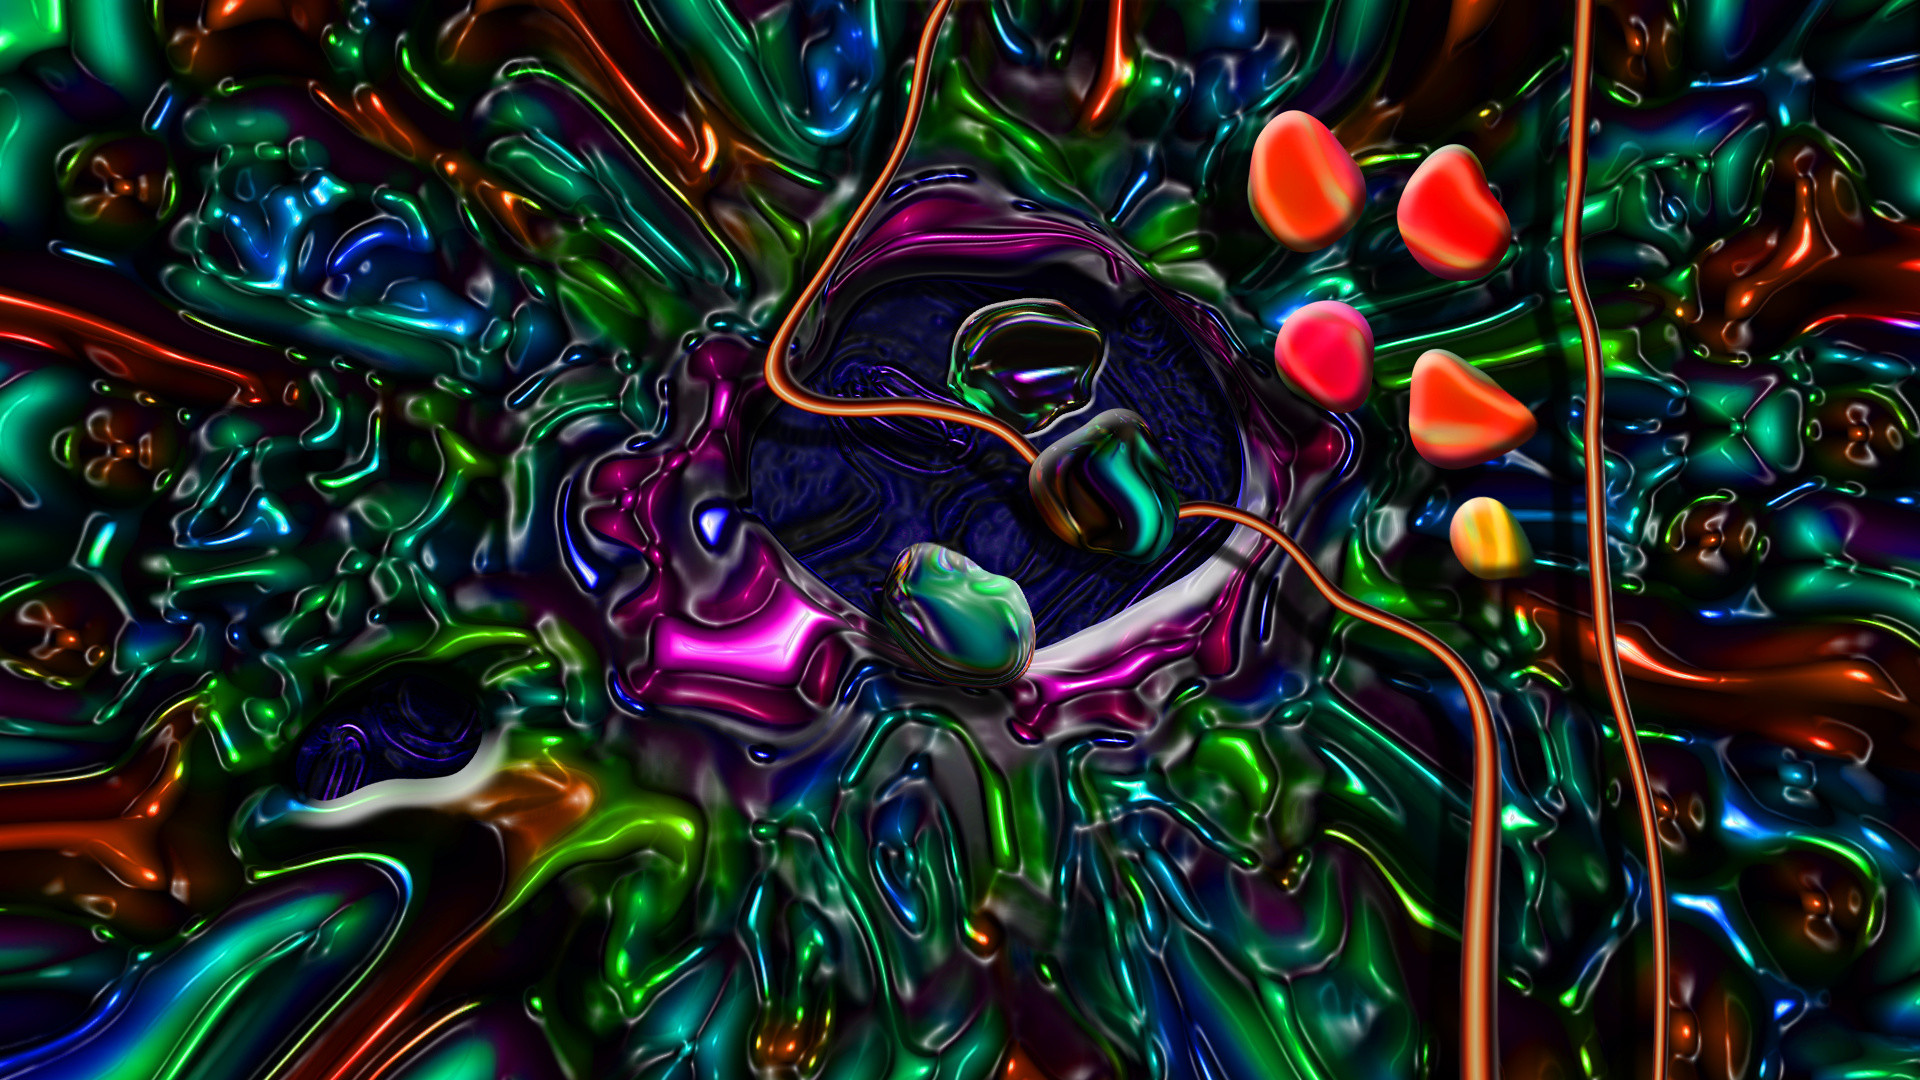 1920x1080 Artistic - Psychedelic 3D CGI Trippy Abstract Wallpaper